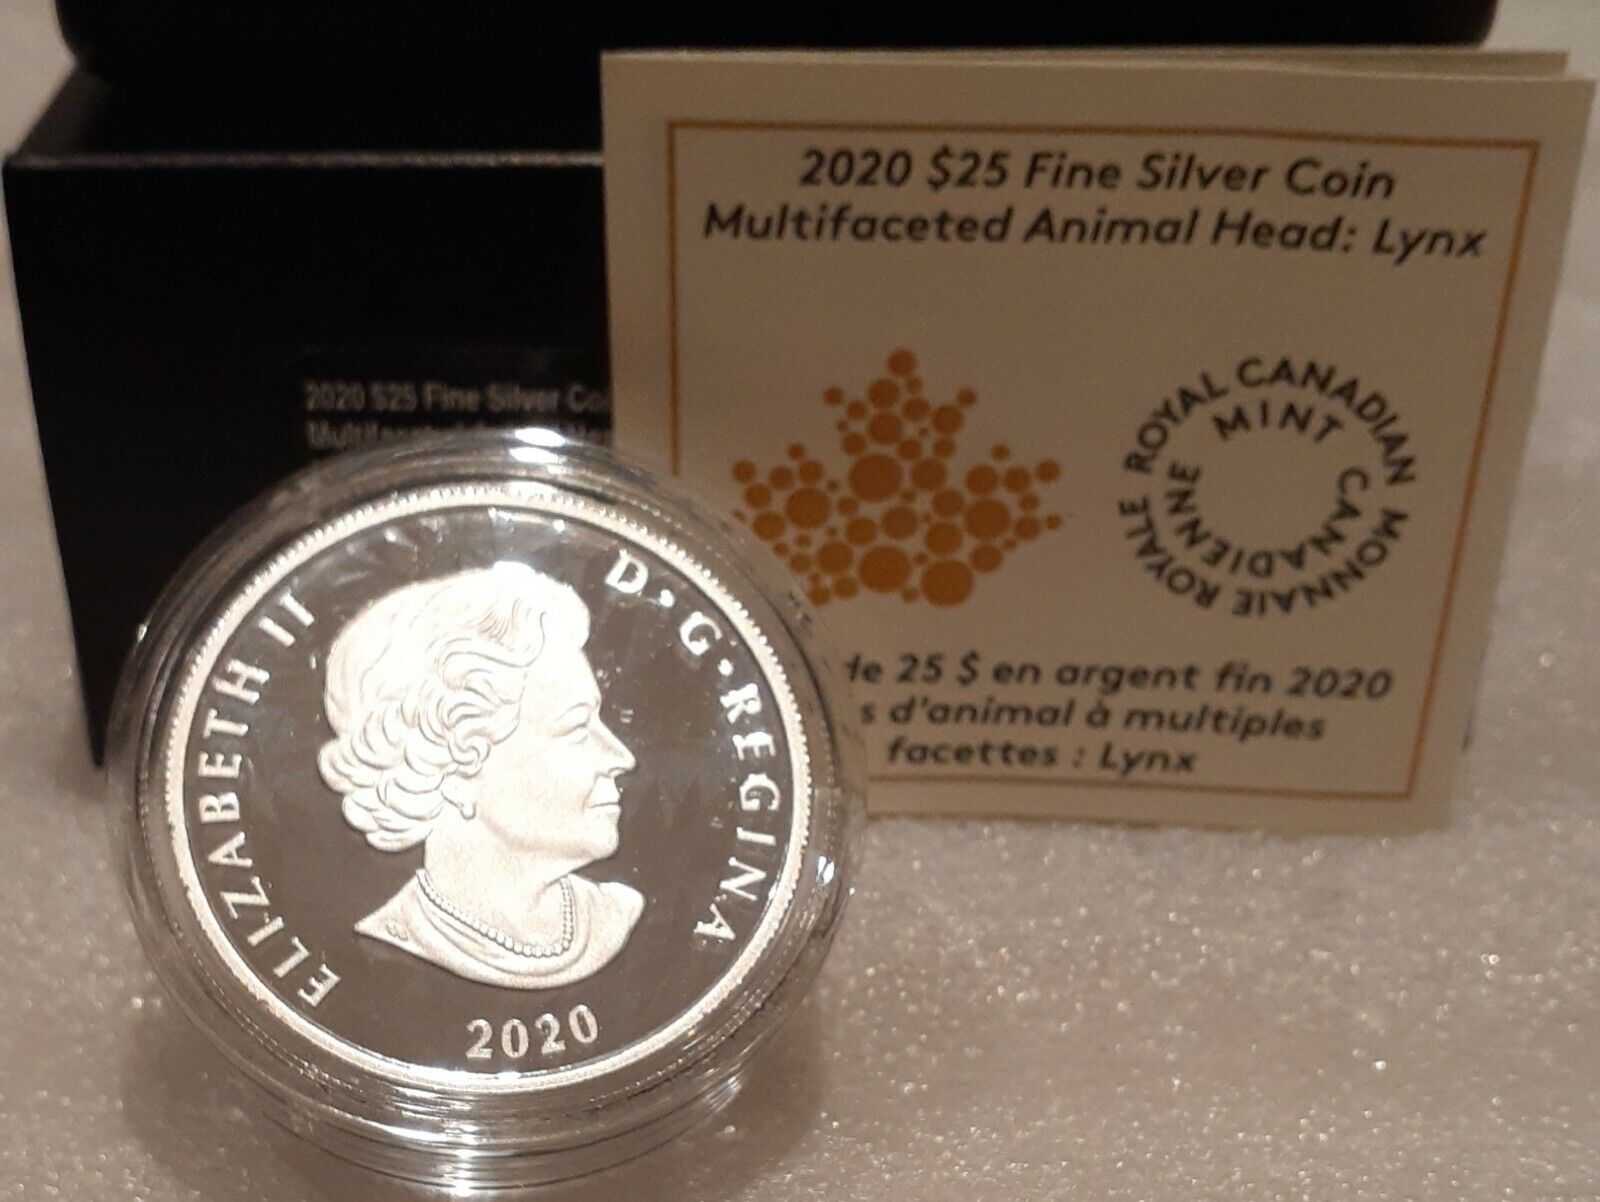 $25 FINE SILVER COIN MULTIFACETED ANIMAL HEAD: LYNX - West Edmonton Coin & Stamp